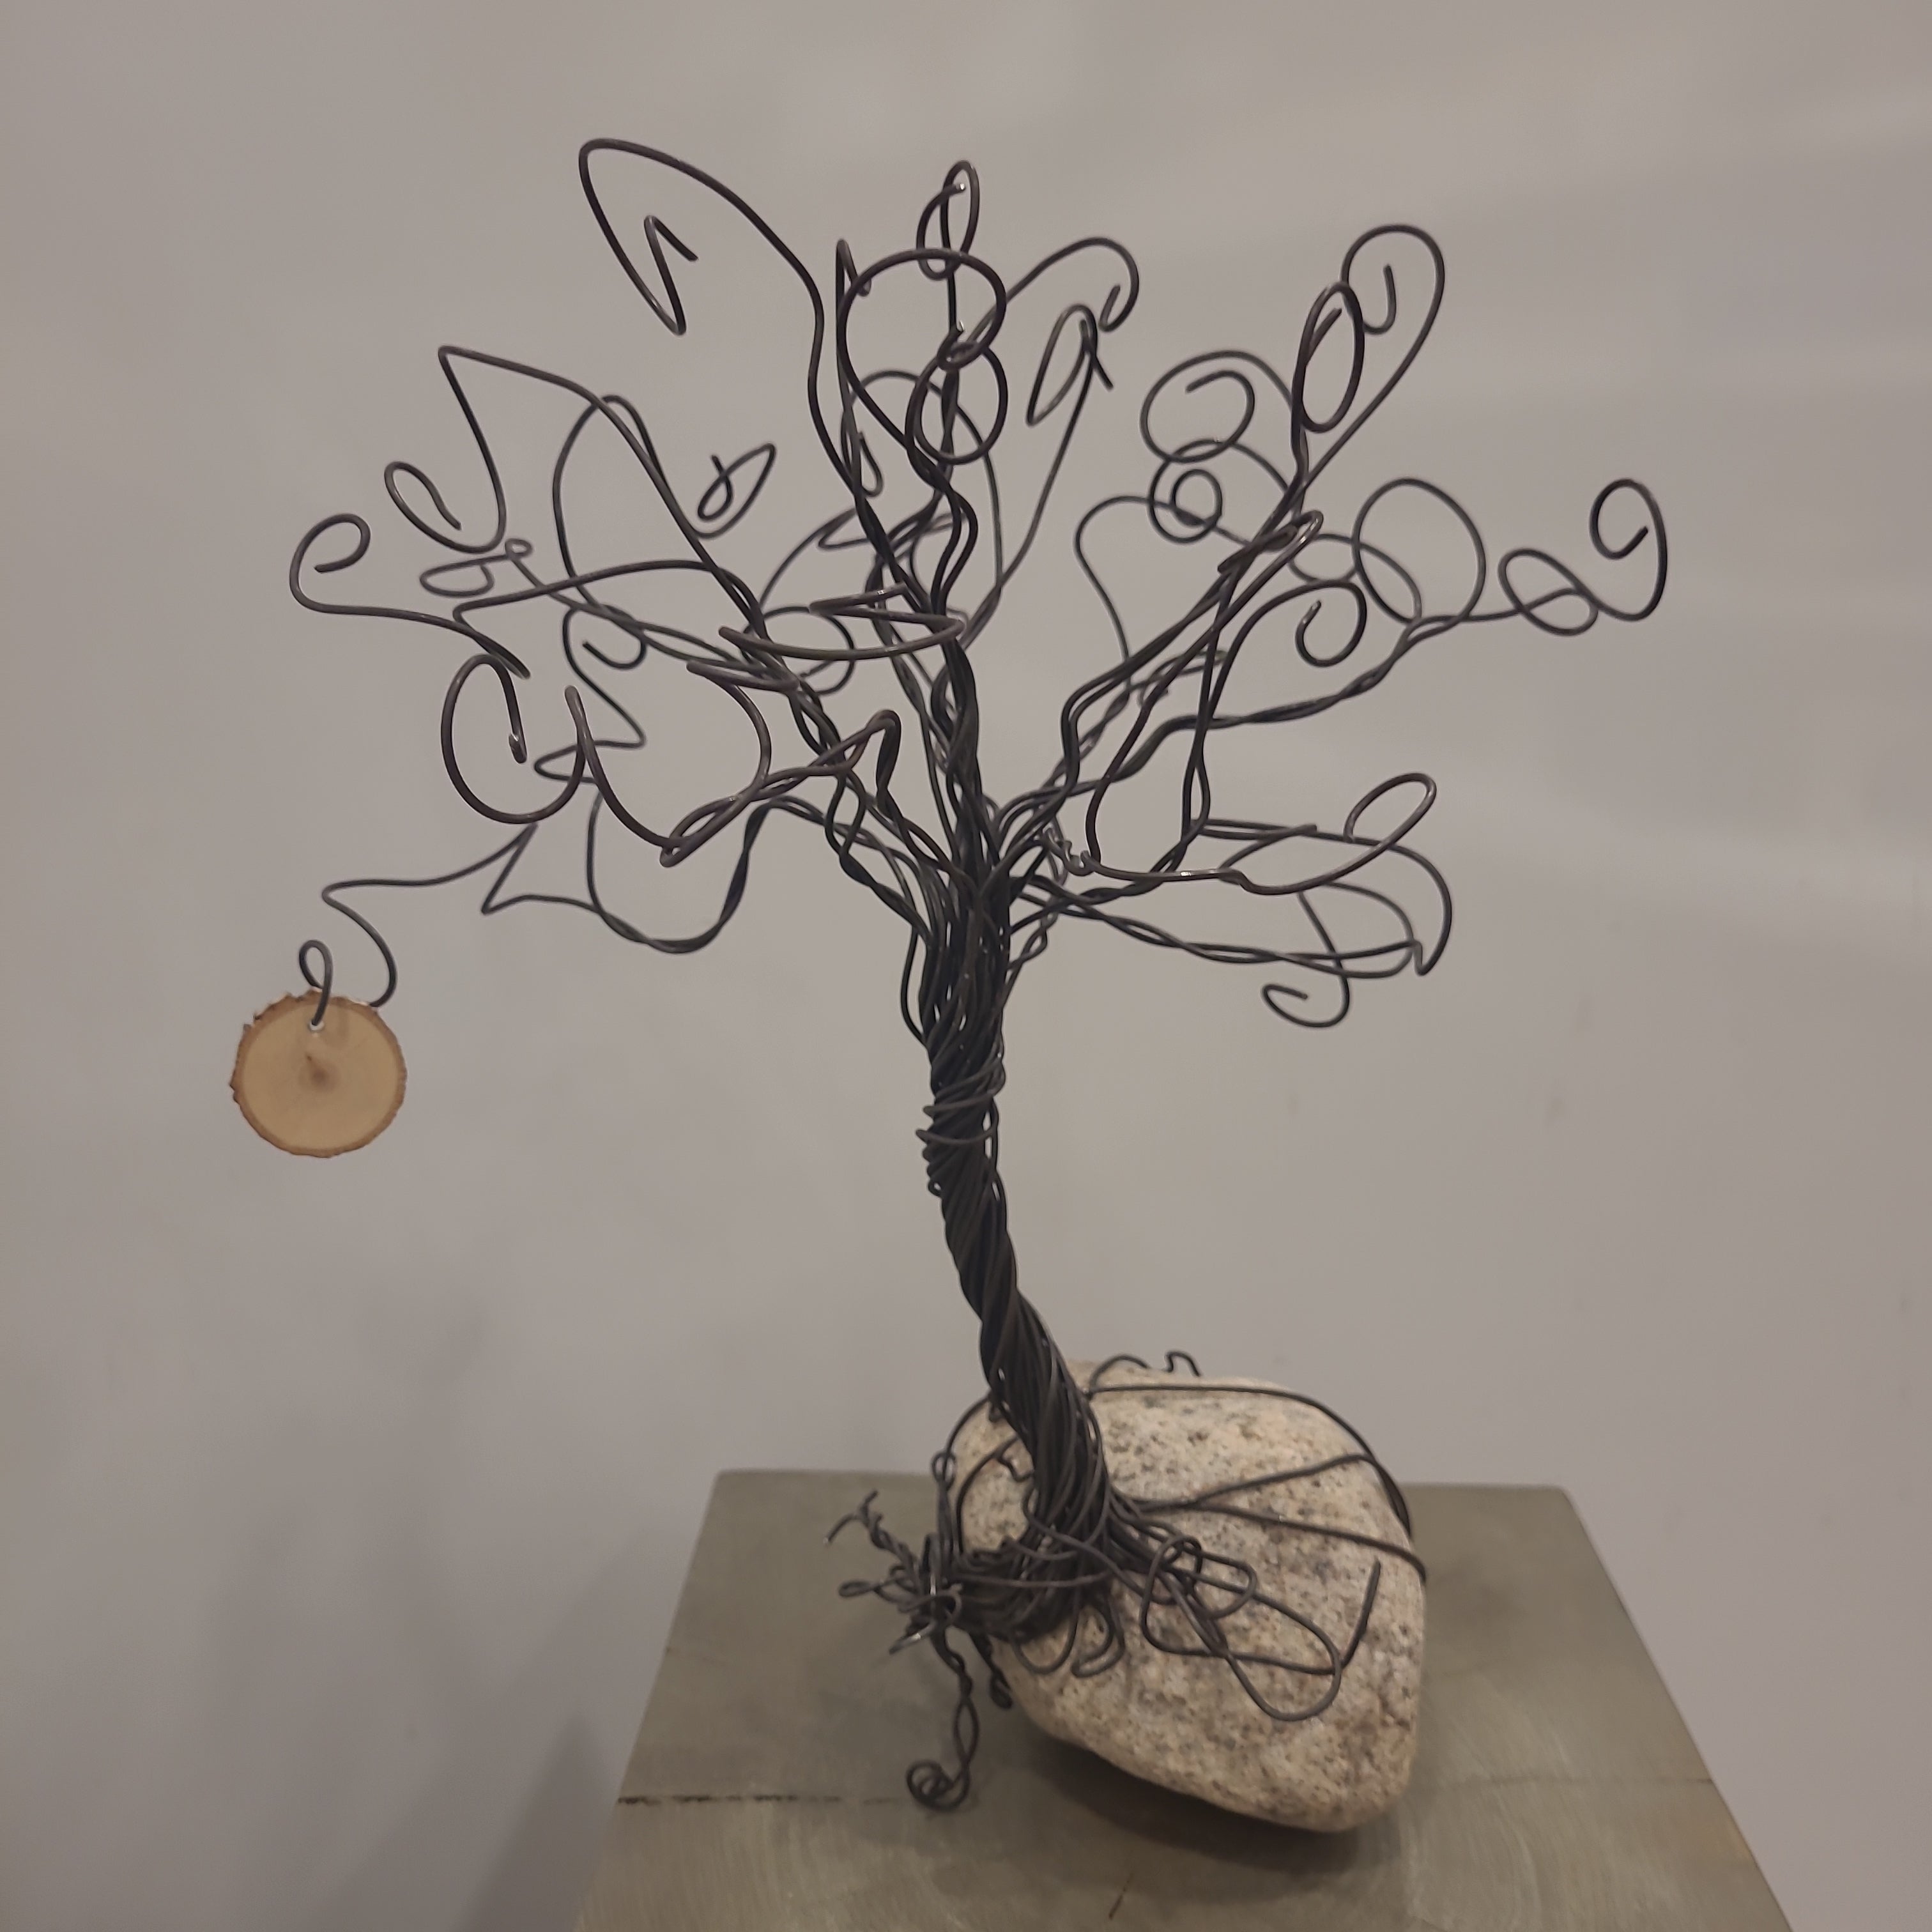 Bent into shape - small wire tree